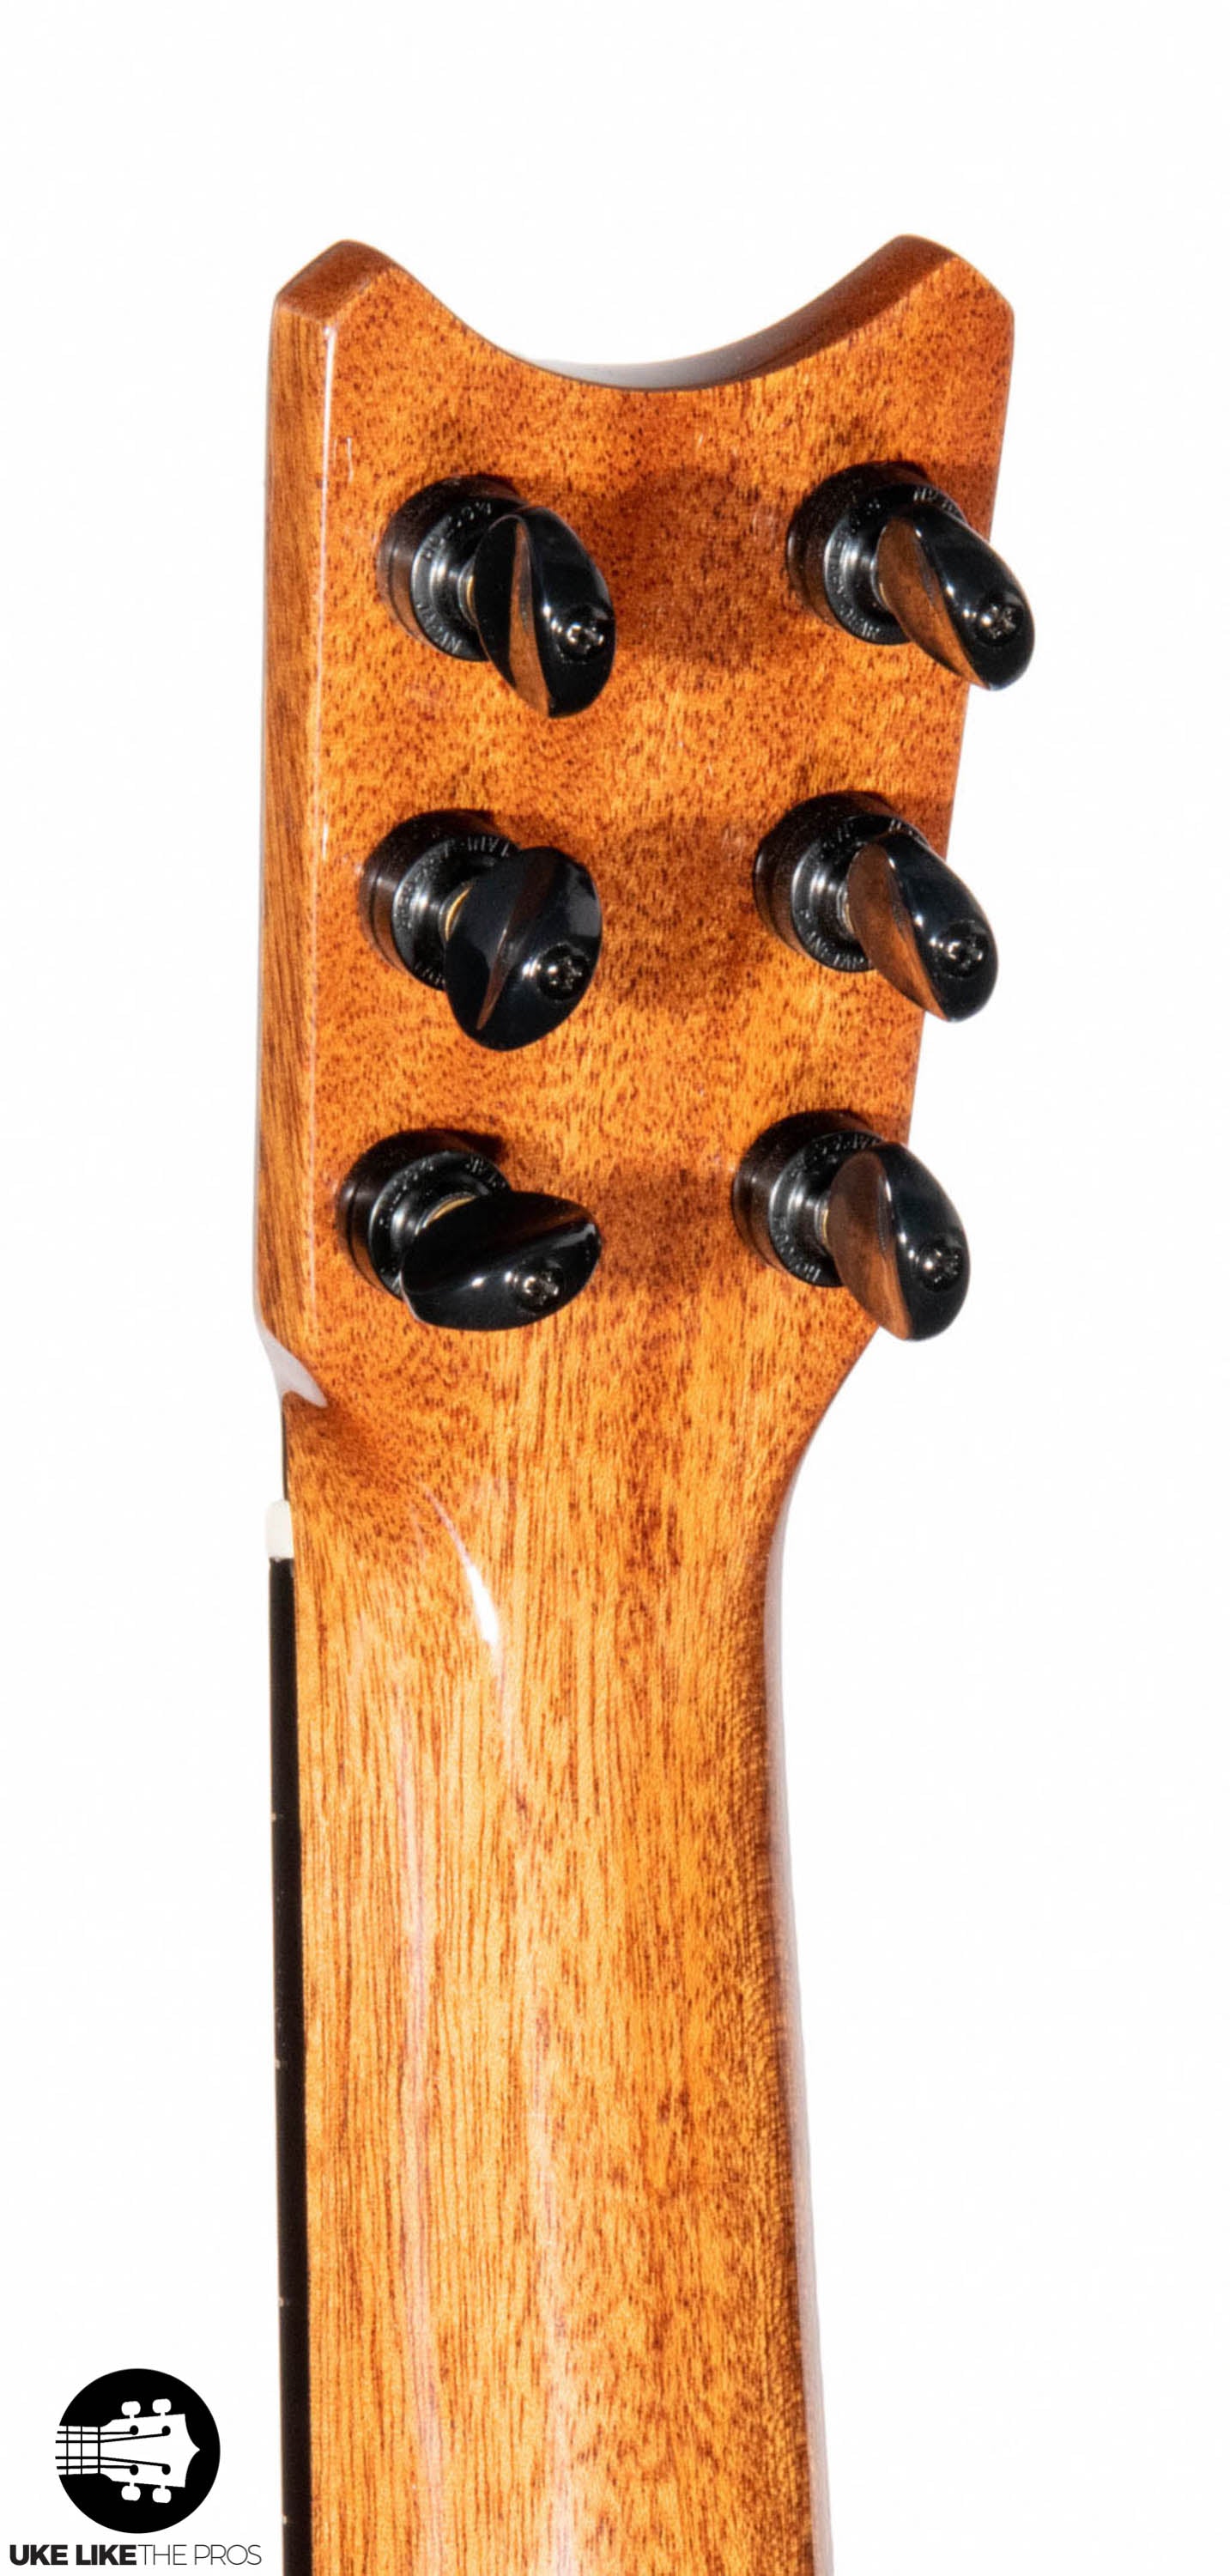 Romero Creations RC-TT6-MG 6 String Guilele Spalted Mango "Atreides" Tuned A to A